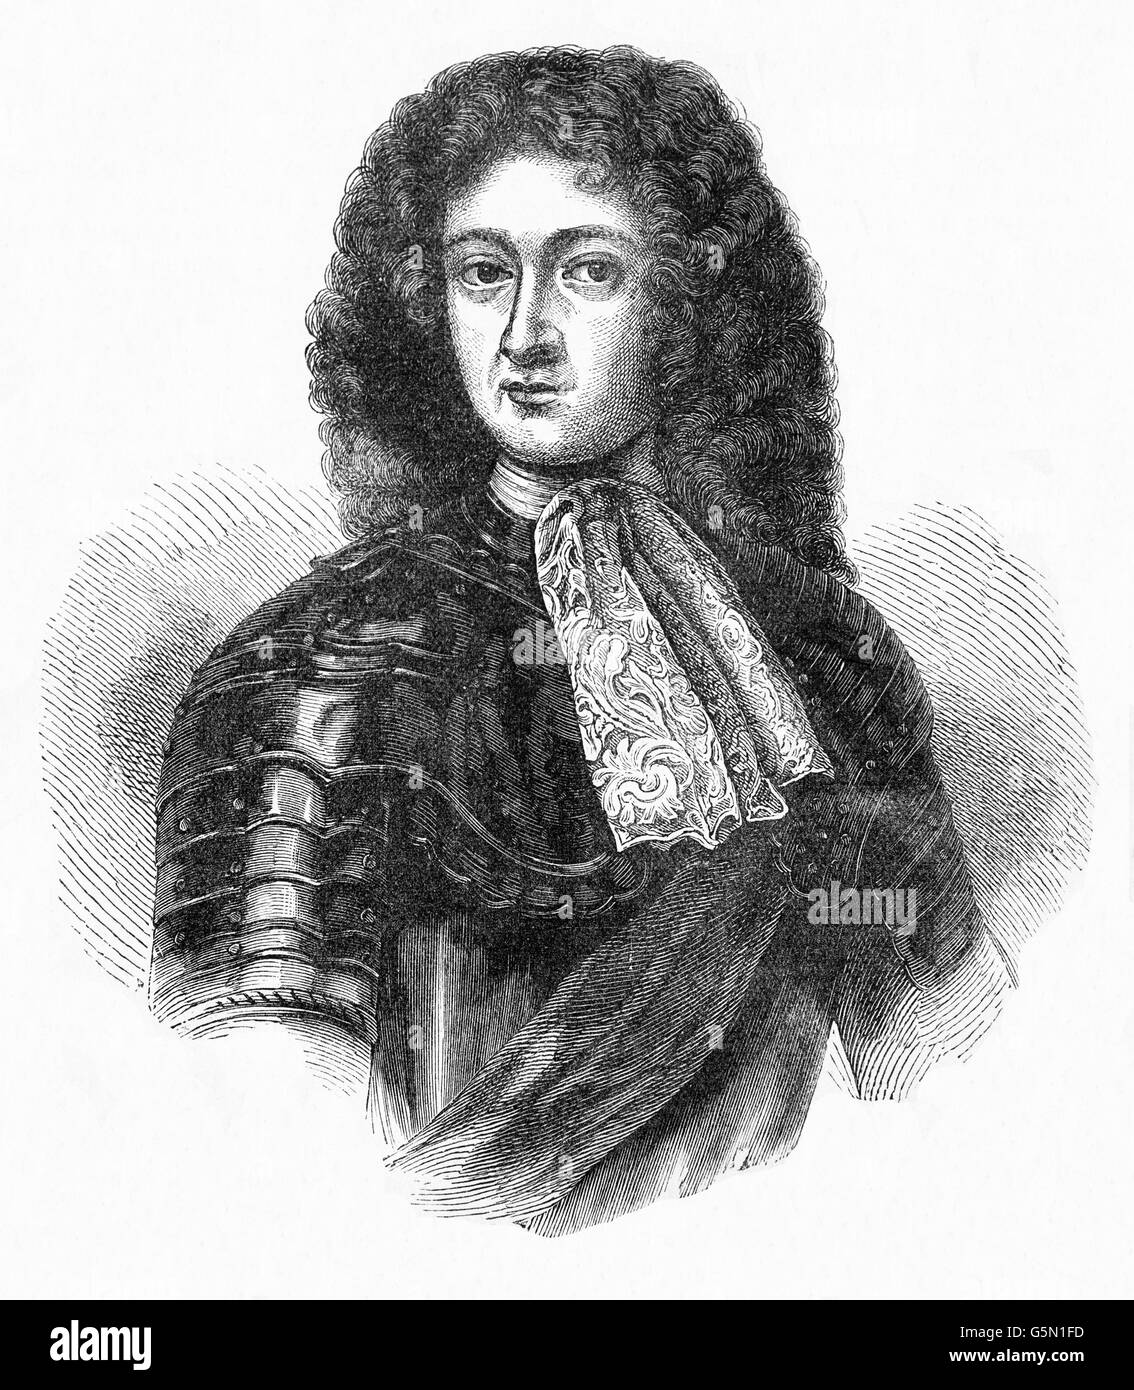 James Scott, 1st Duke of Monmouth, (1649 – 1685), was an English nobleman. Originally called James Crofts or James Fitzroy, he was born in Rotterdam in the Netherlands, the eldest illegitimate son of Charles II  and his mistress, Lucy Walter. Stock Photo